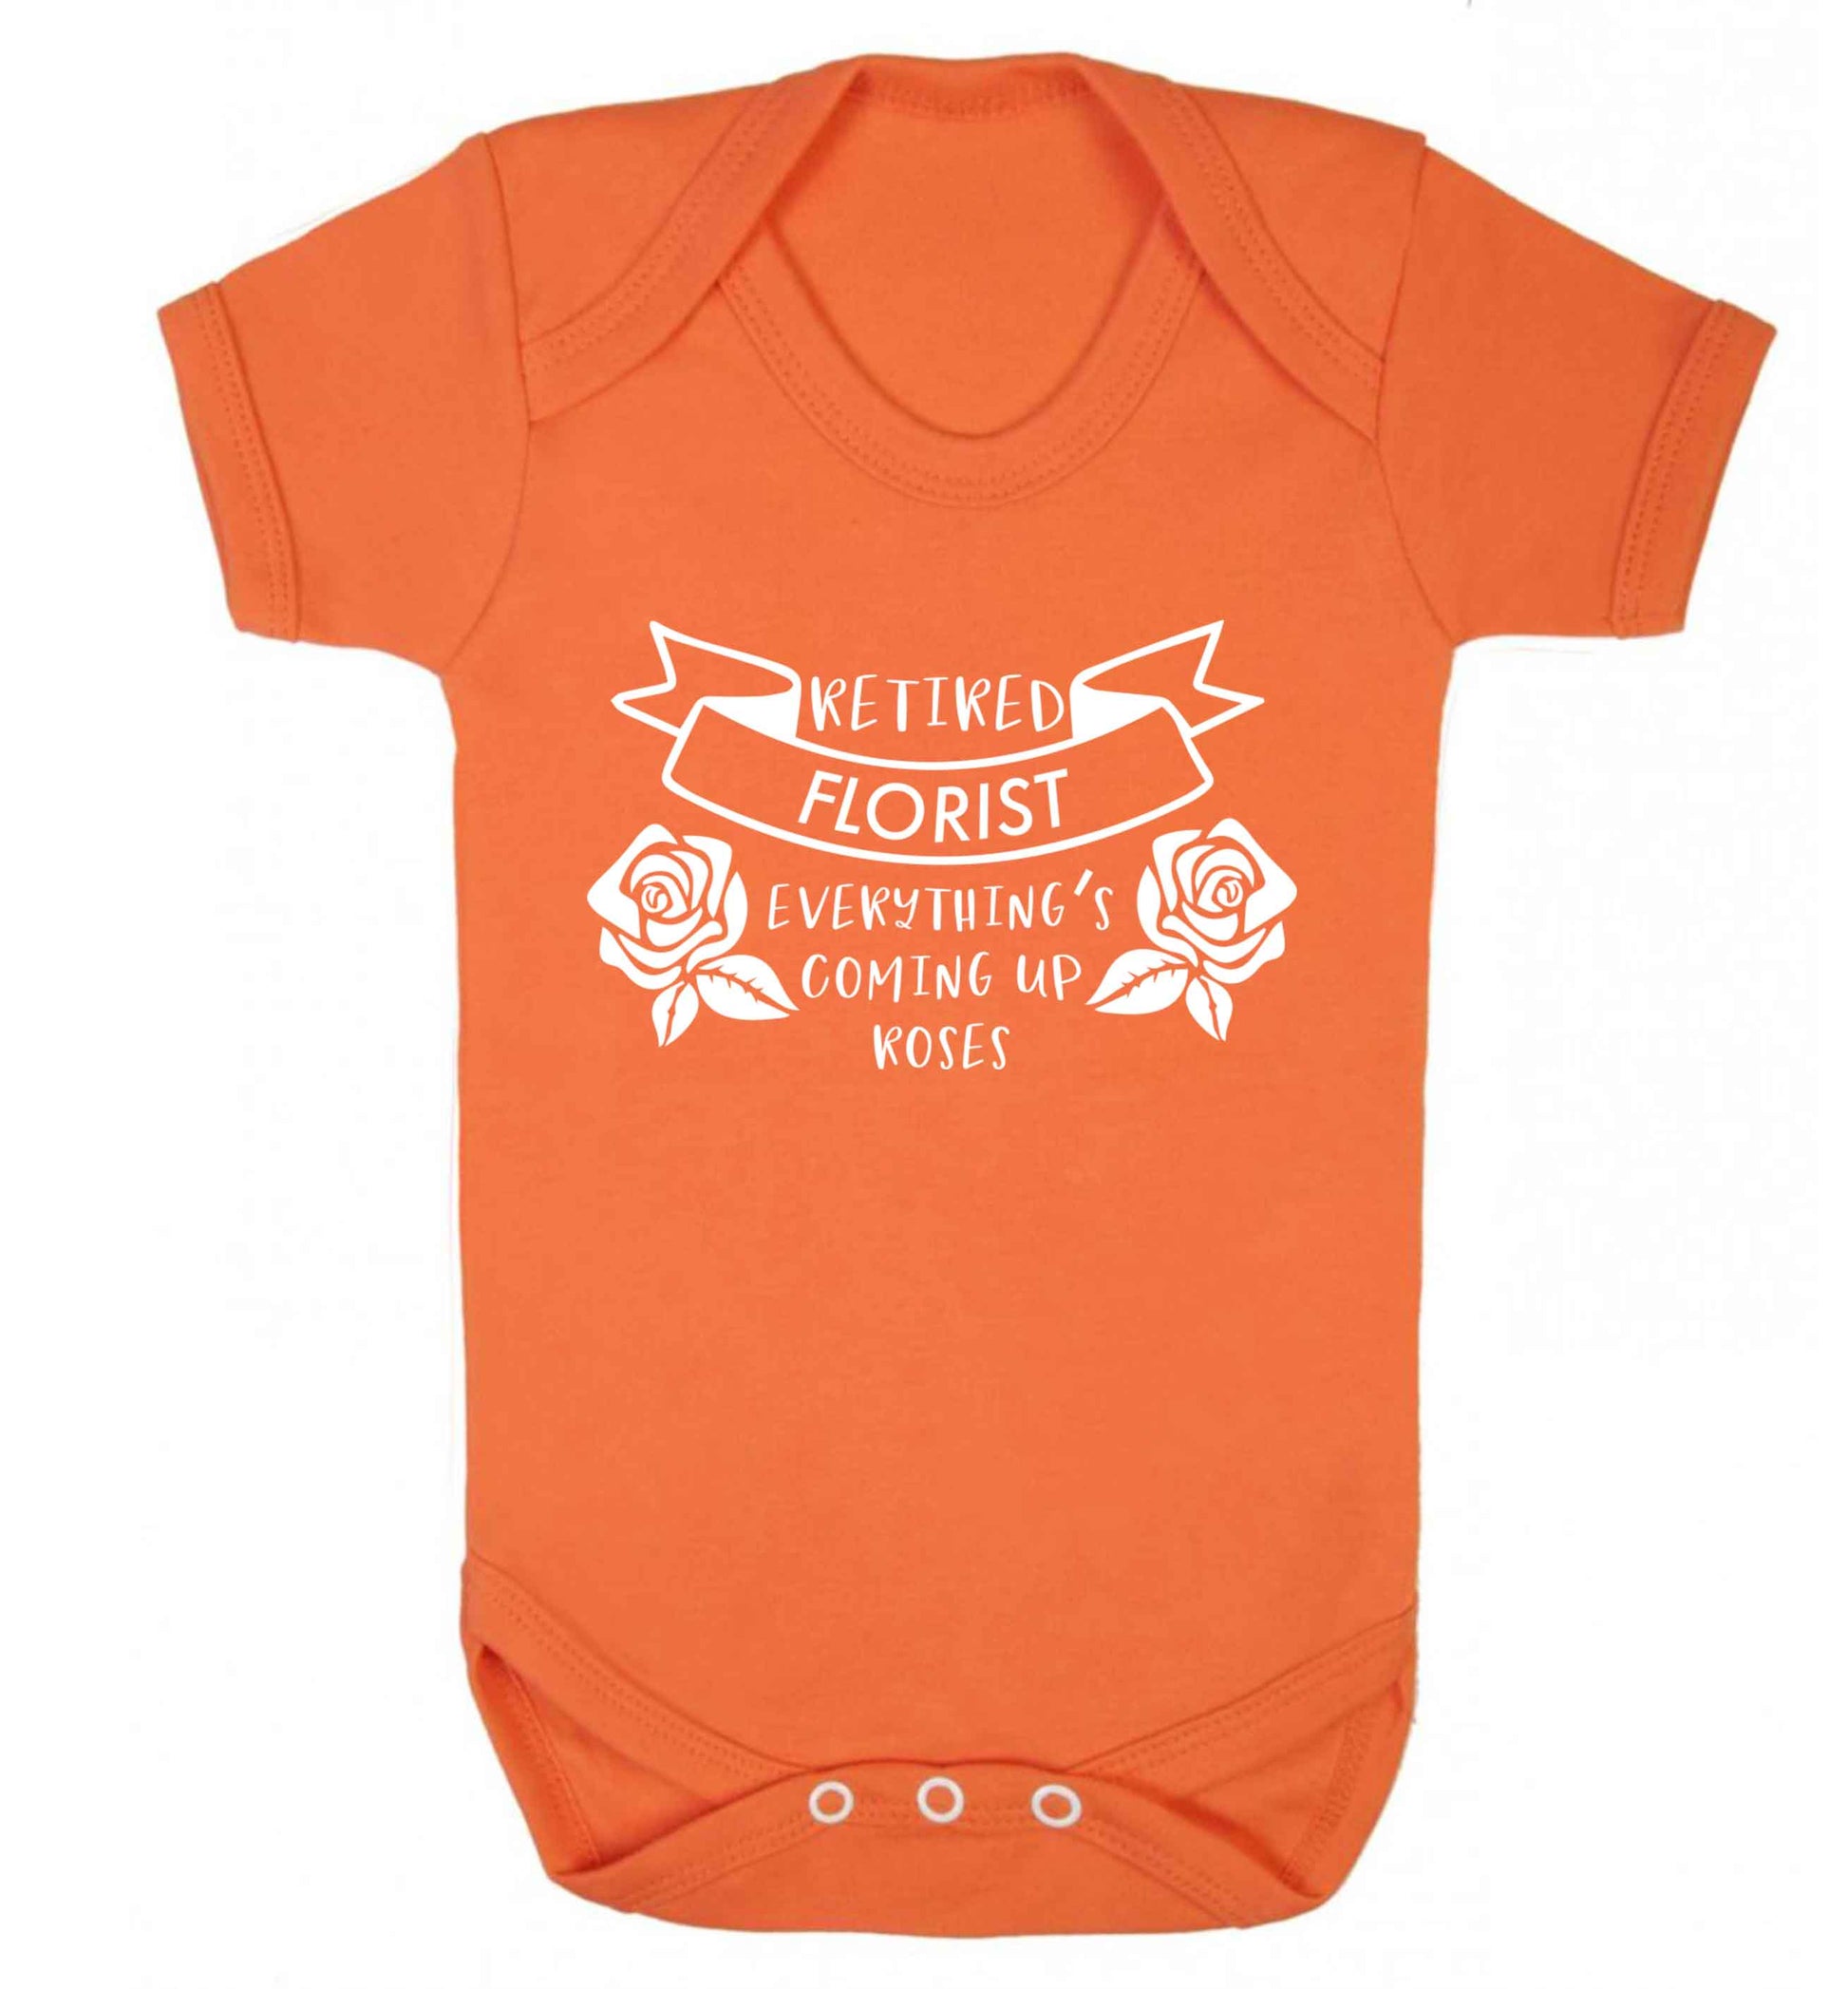 Retired florist everything's coming up roses Baby Vest orange 18-24 months